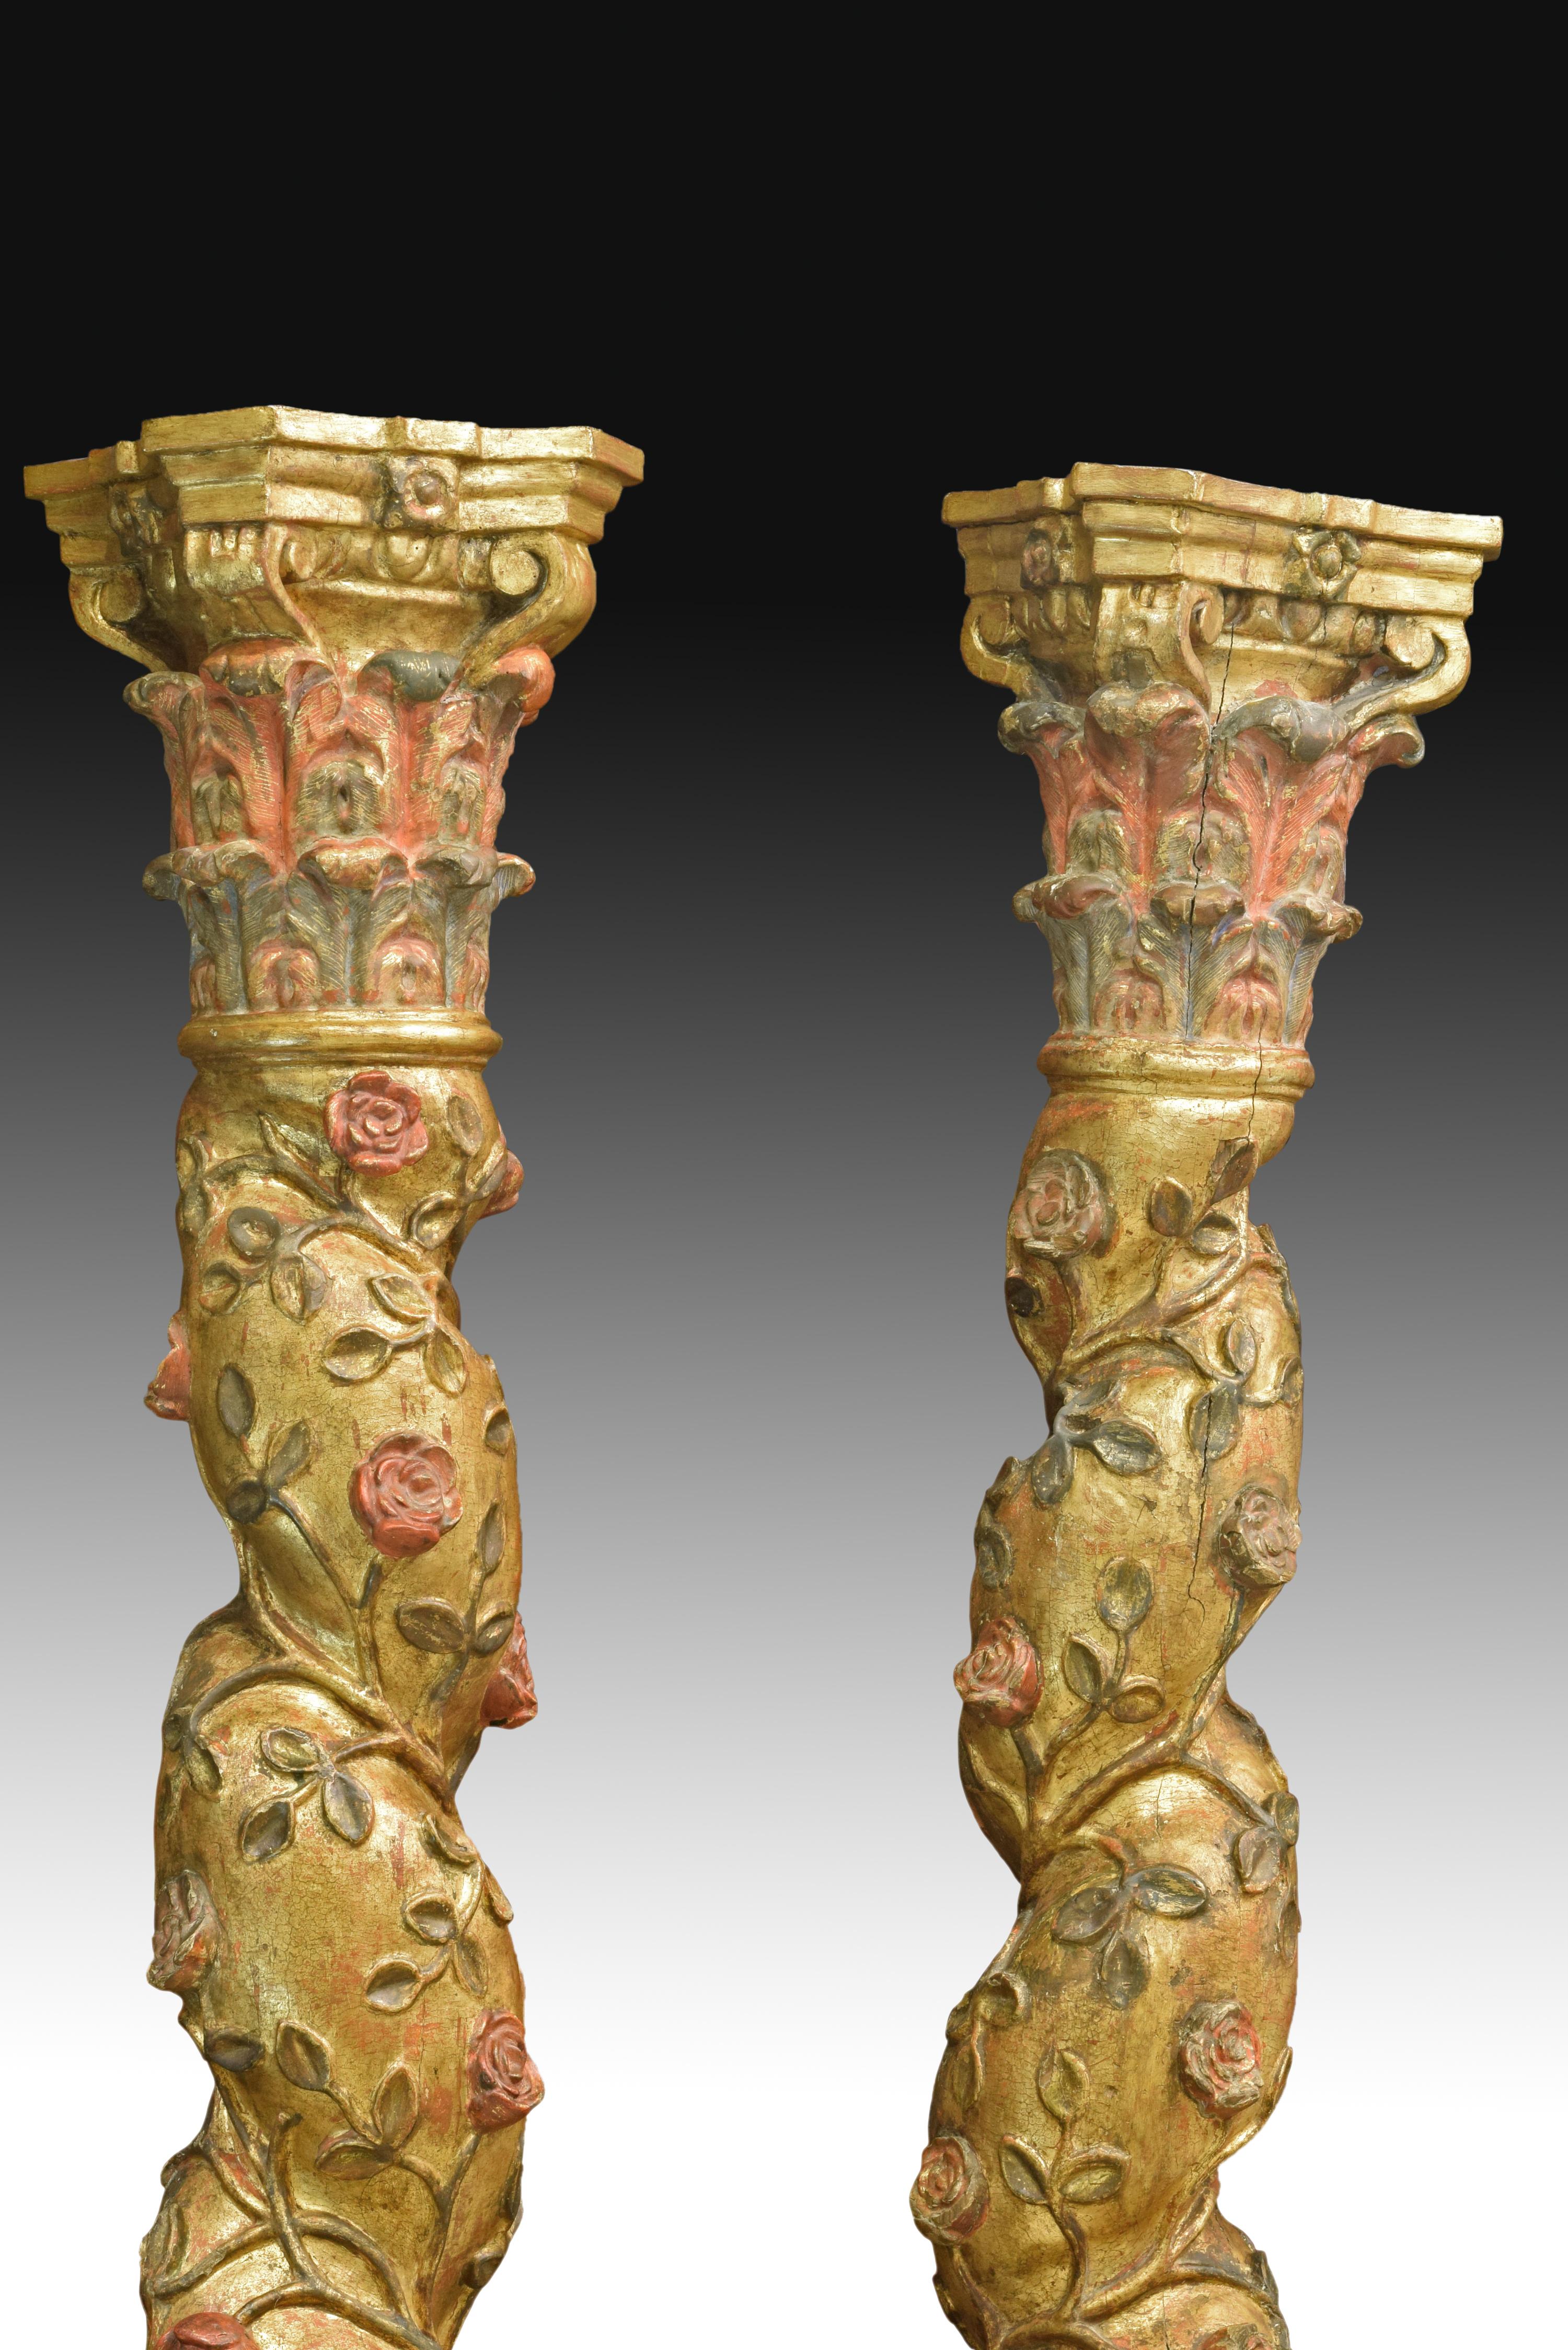 Pair of decorative carved and gilded wooden columns with a pedestal in green tones, decorated with smooth moldings, Solomonic shaft decorated with roses and polychrome leaves on the golden background and in slight relief and capitals similar to